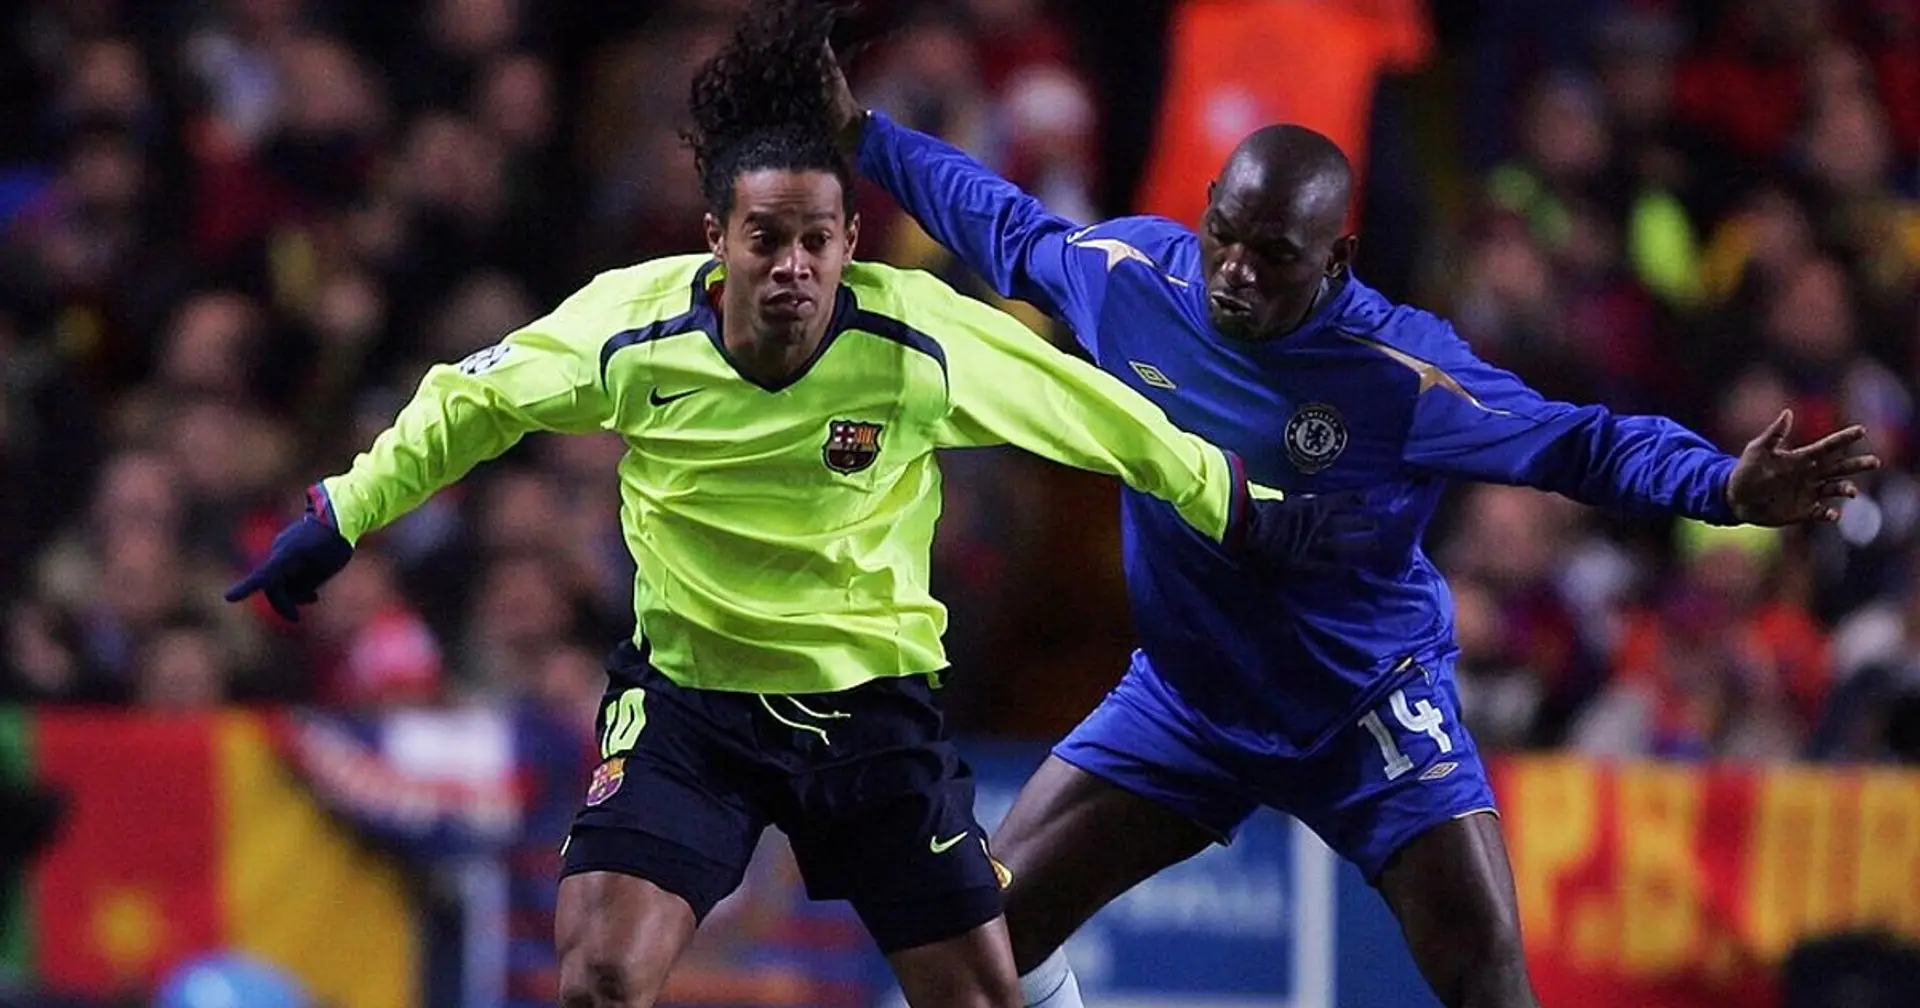 Makelele & 2 more Chelsea legends are in Ronaldinho's all-time Champions League dream team